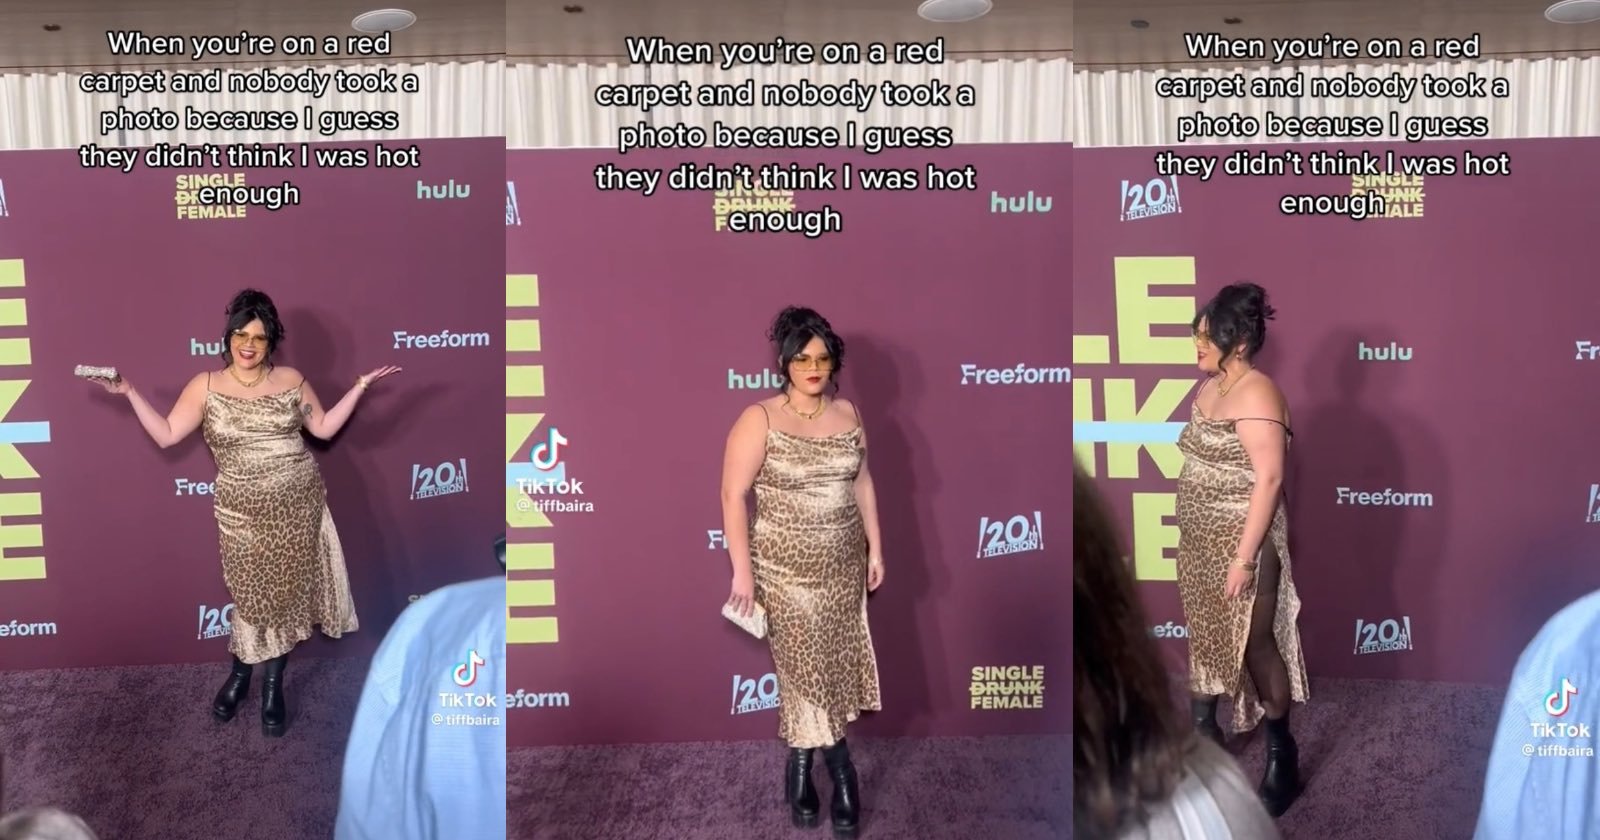 Influencer Criticizes Photographers For Not Taking Her Picture on Red Carpet